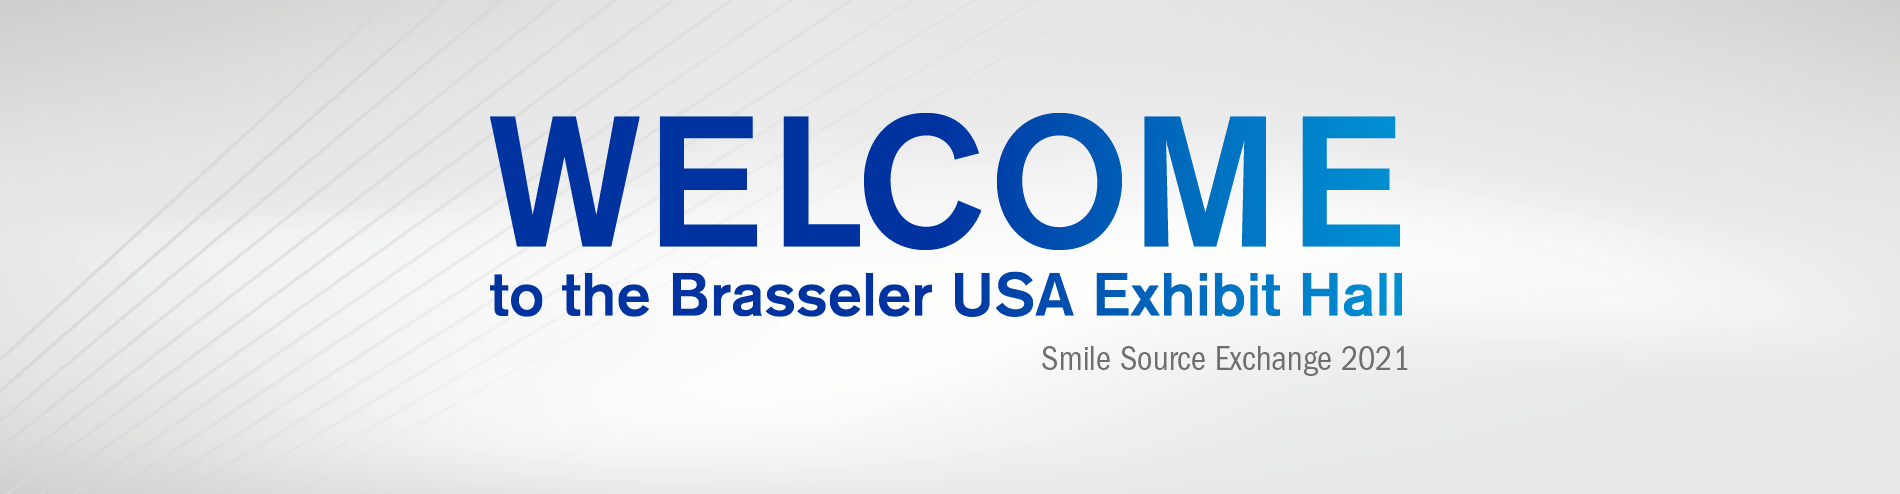 Welcome to the Brasseler USA Exhibit Hall